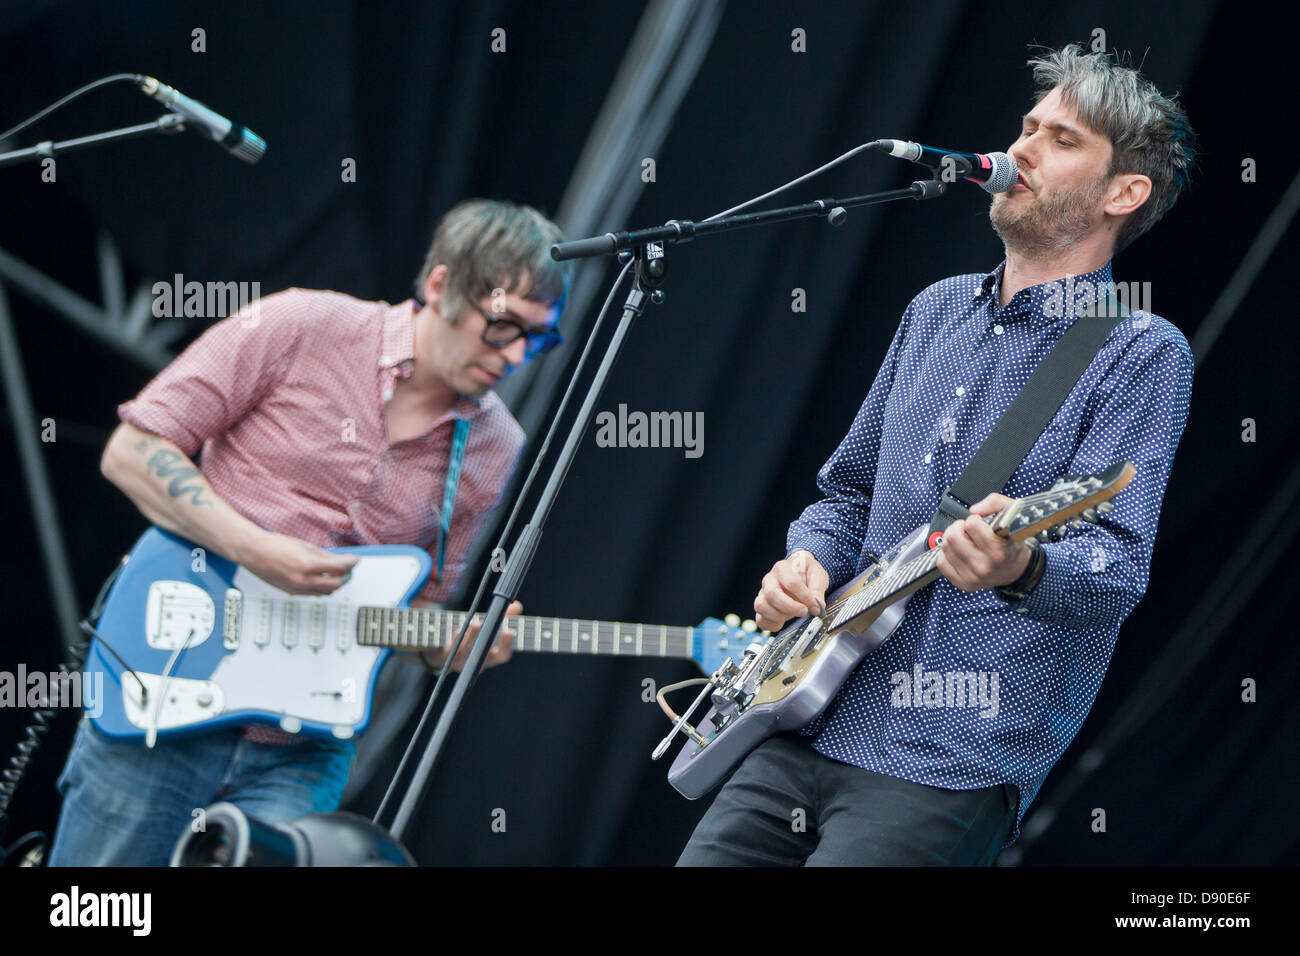 Nuremberg, Germany. 7th June 2013. Front man of German band Tocotronic, Dirk von Lowtzow, and guitarist Rick McPhail perform at the music festival "Rock im Park" in Nuremberg, Germany, 07 June 2013. Over 70,000 rock musicians are expected to the festival which continues until 09 June. Photo: DANIEL KARMANN/dpa/Alamy Live News Stock Photo